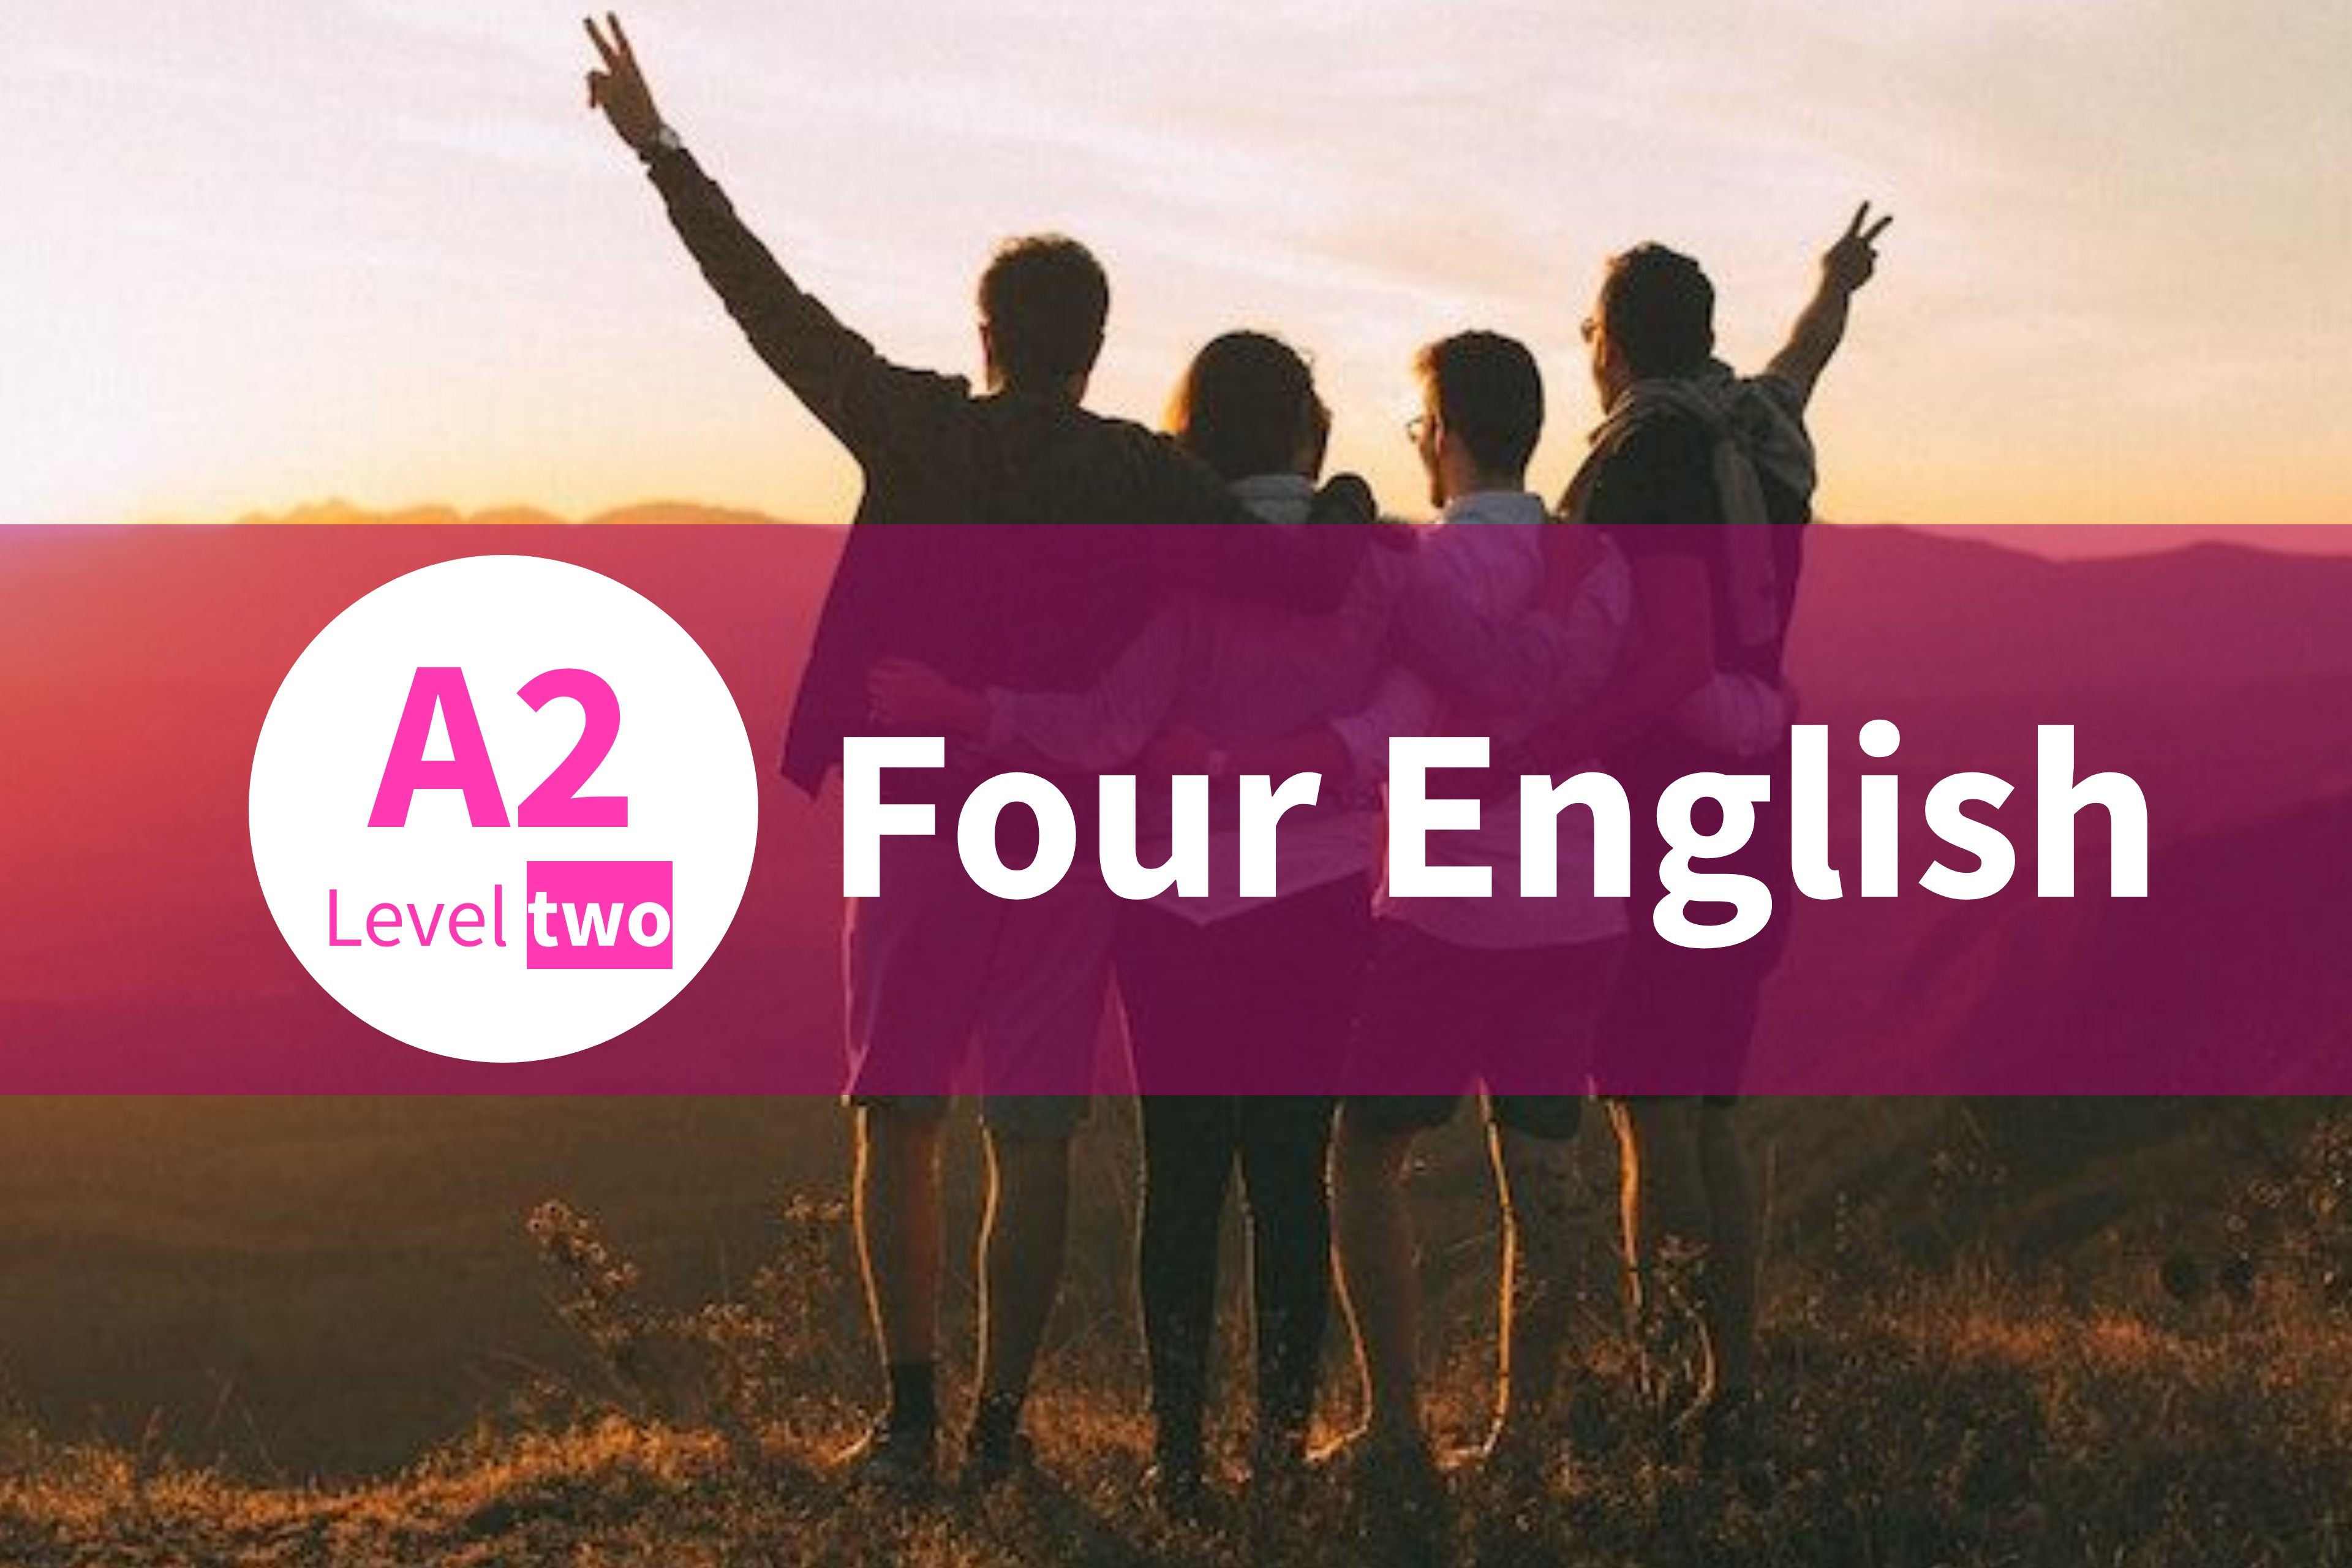 FOUR ENGLISH A2 - LEVEL TWO